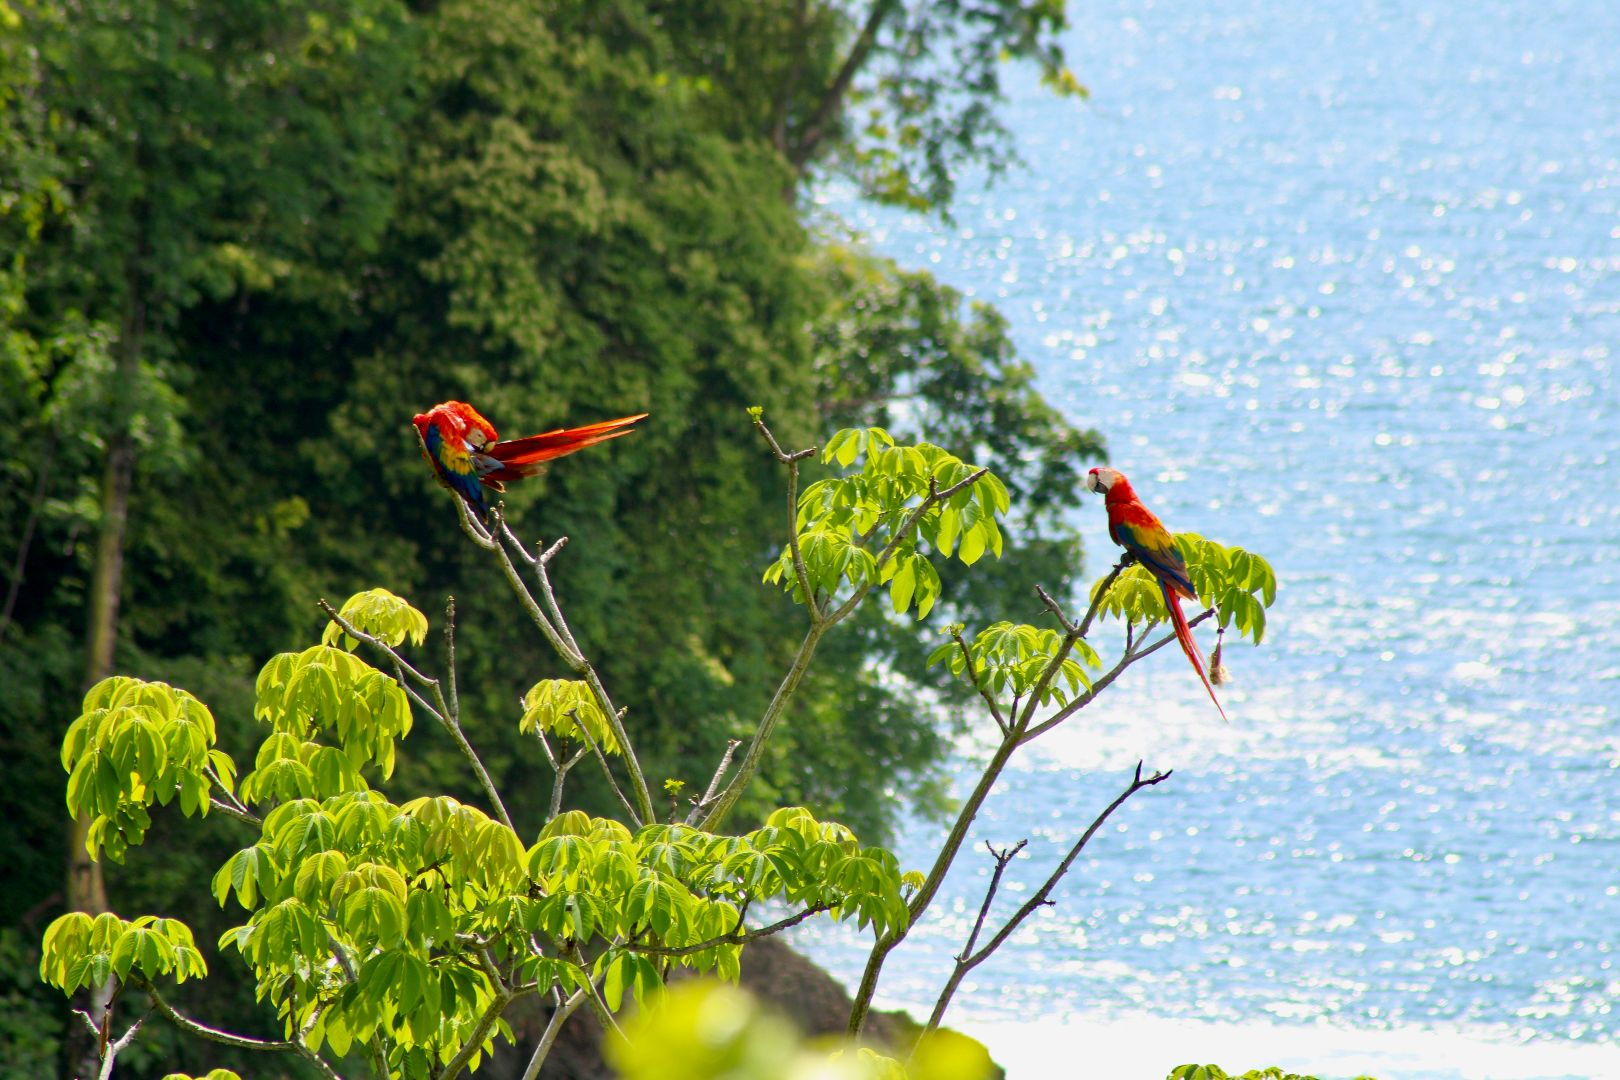 Colorful macaws in a tree in Costa Rica